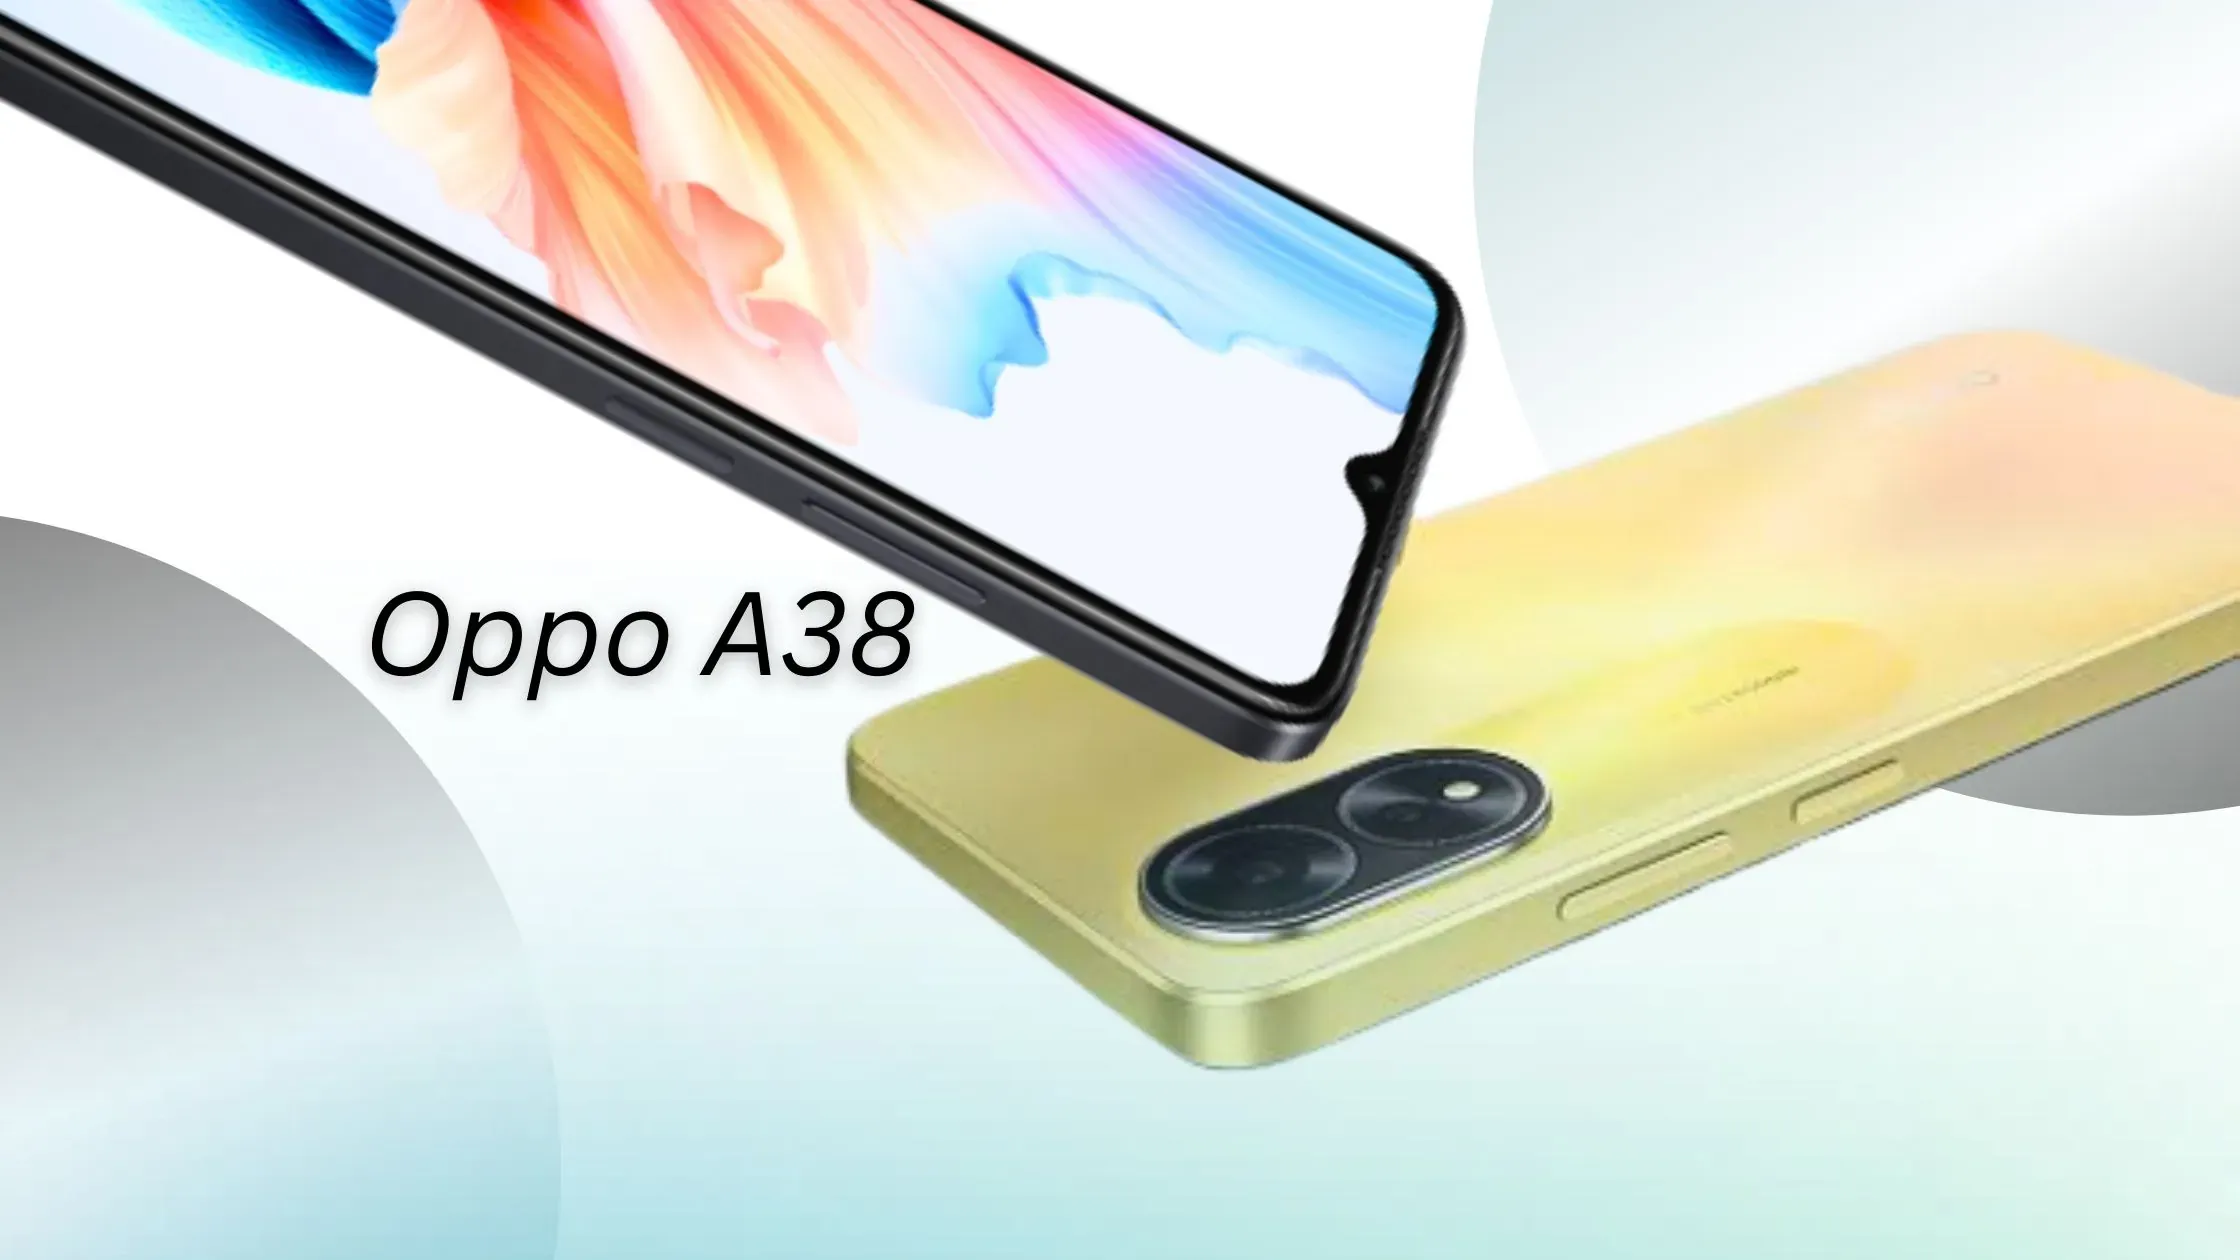 Oppo A38 Price in BD